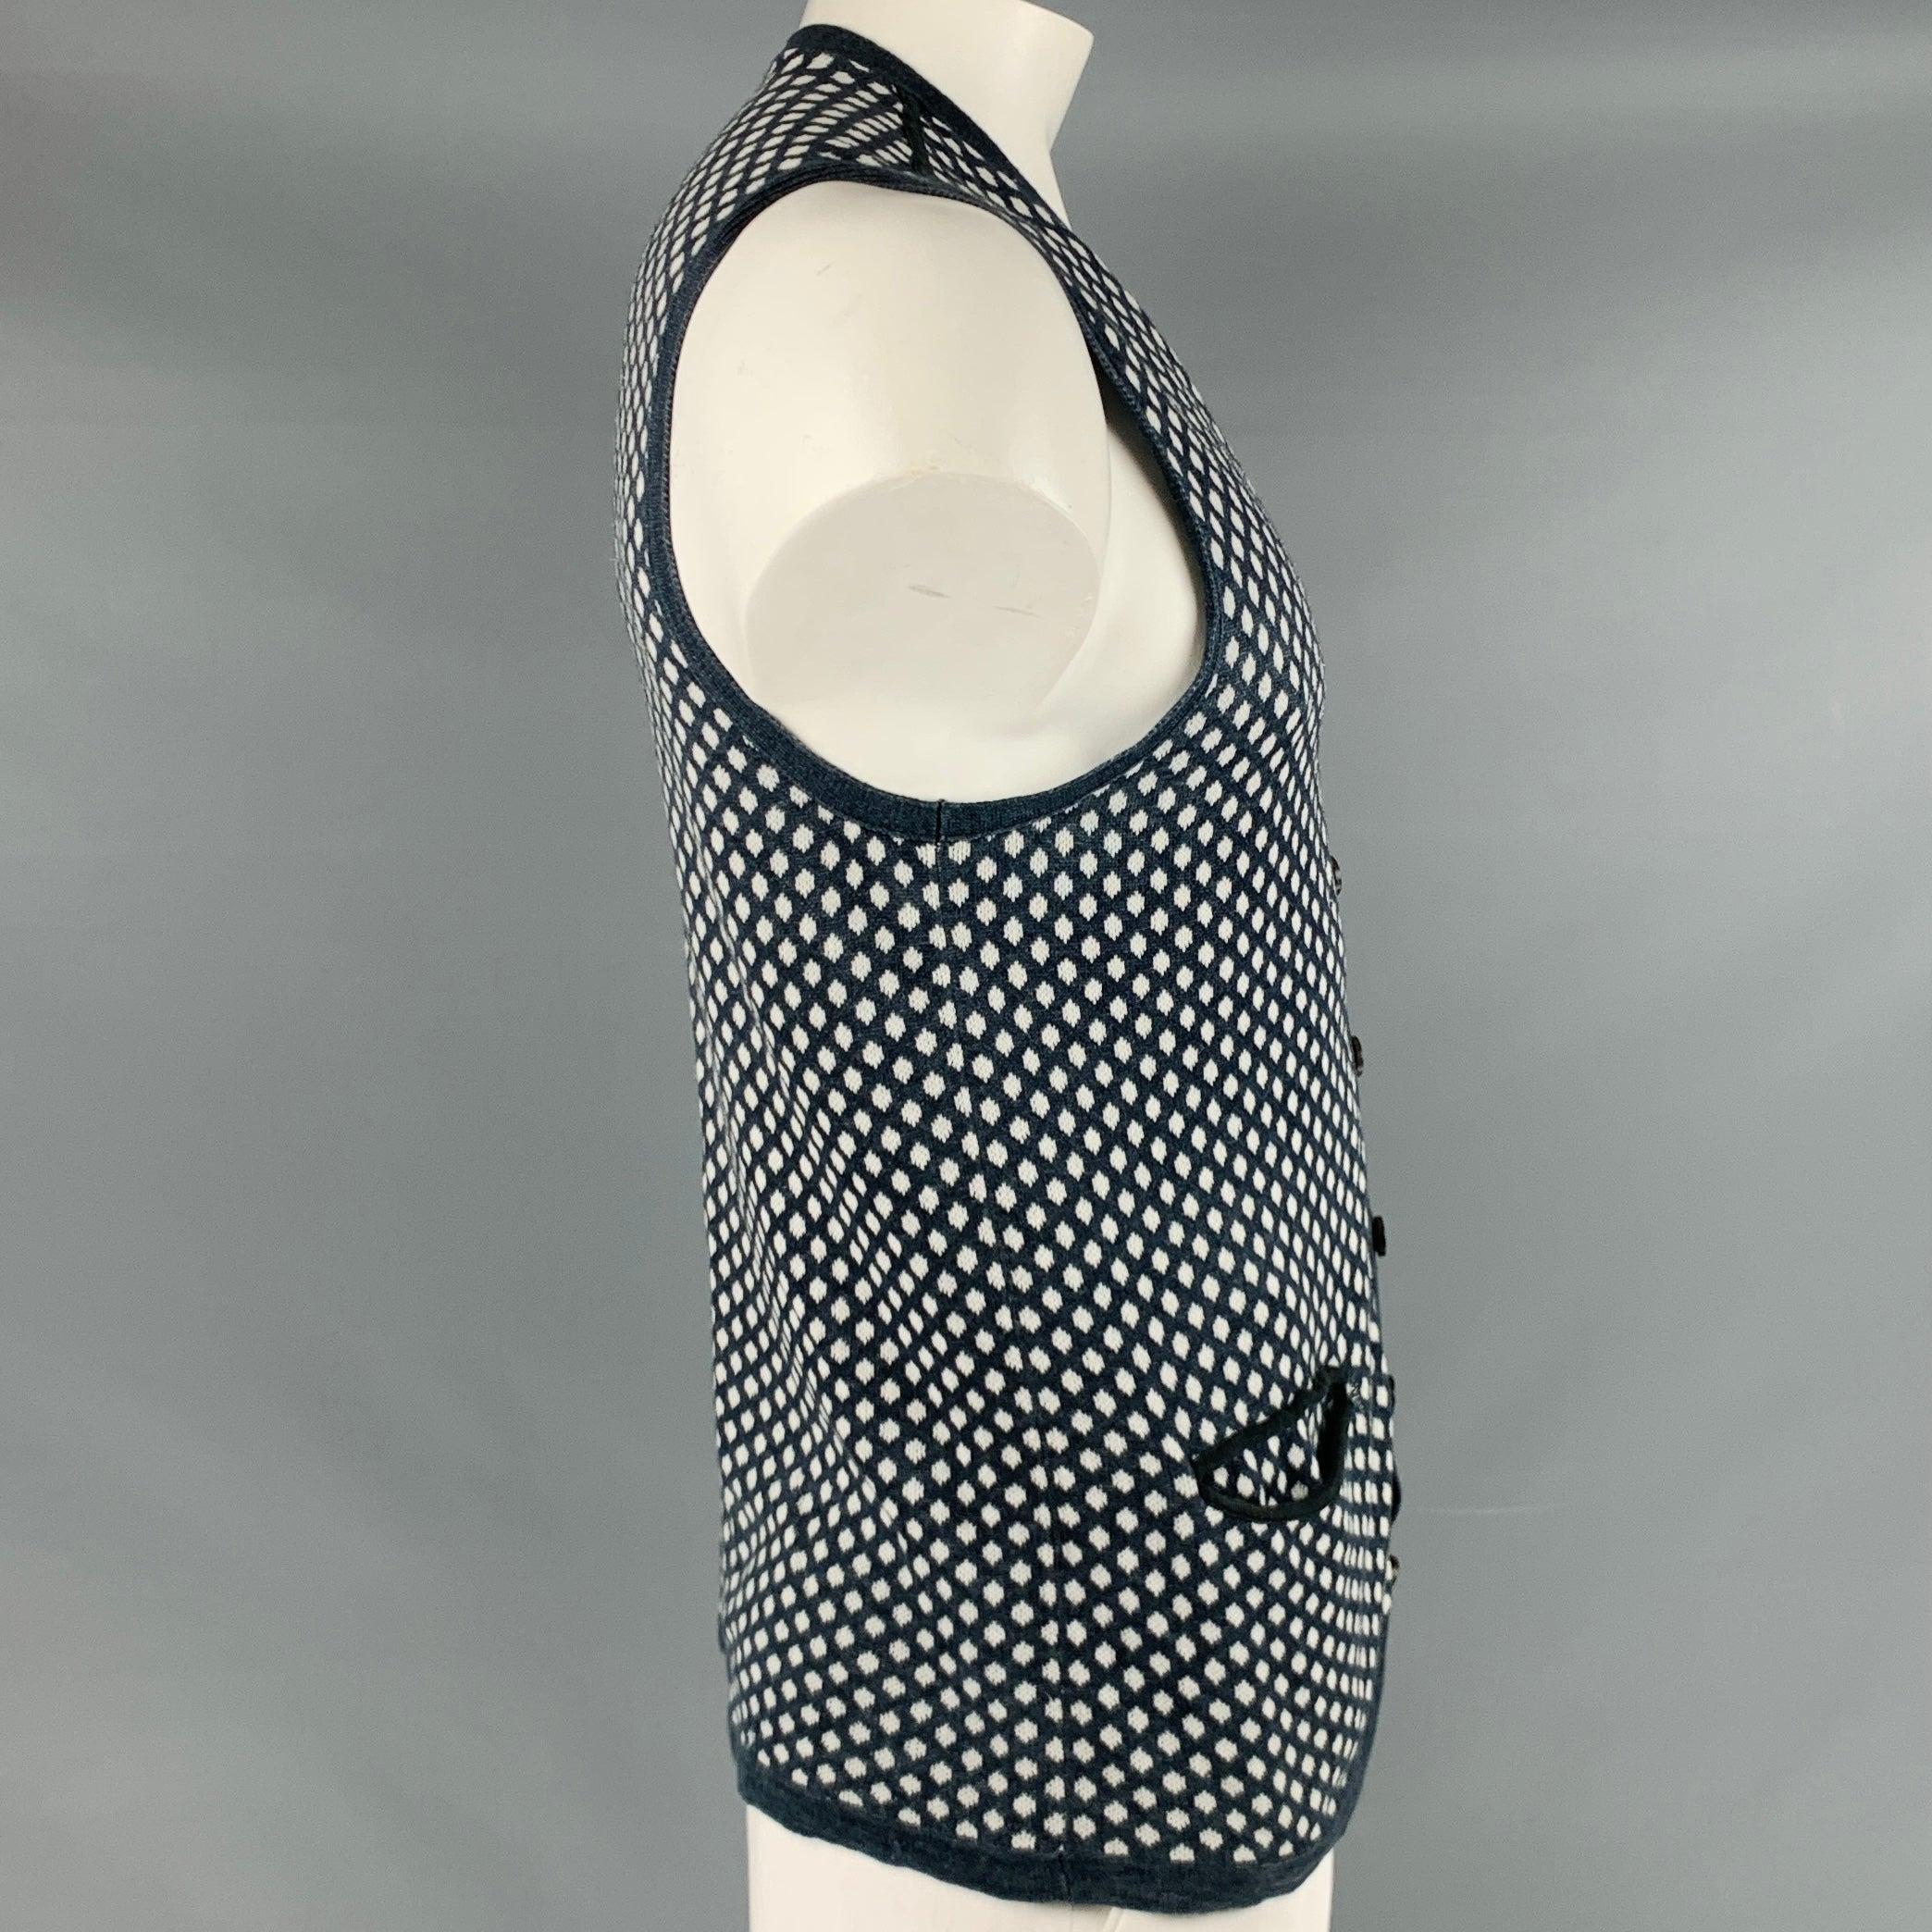 JOHN VARVATOS vest in a navy linen cotton blend knit featuring white dots pattern, two small pockets, V-neck, and button closure.Excellent Pre-Owned Condition. 

Marked:   L 

Measurements: 
 
Shoulder: 13.5 inches Chest: 41 inches Length: 27.5